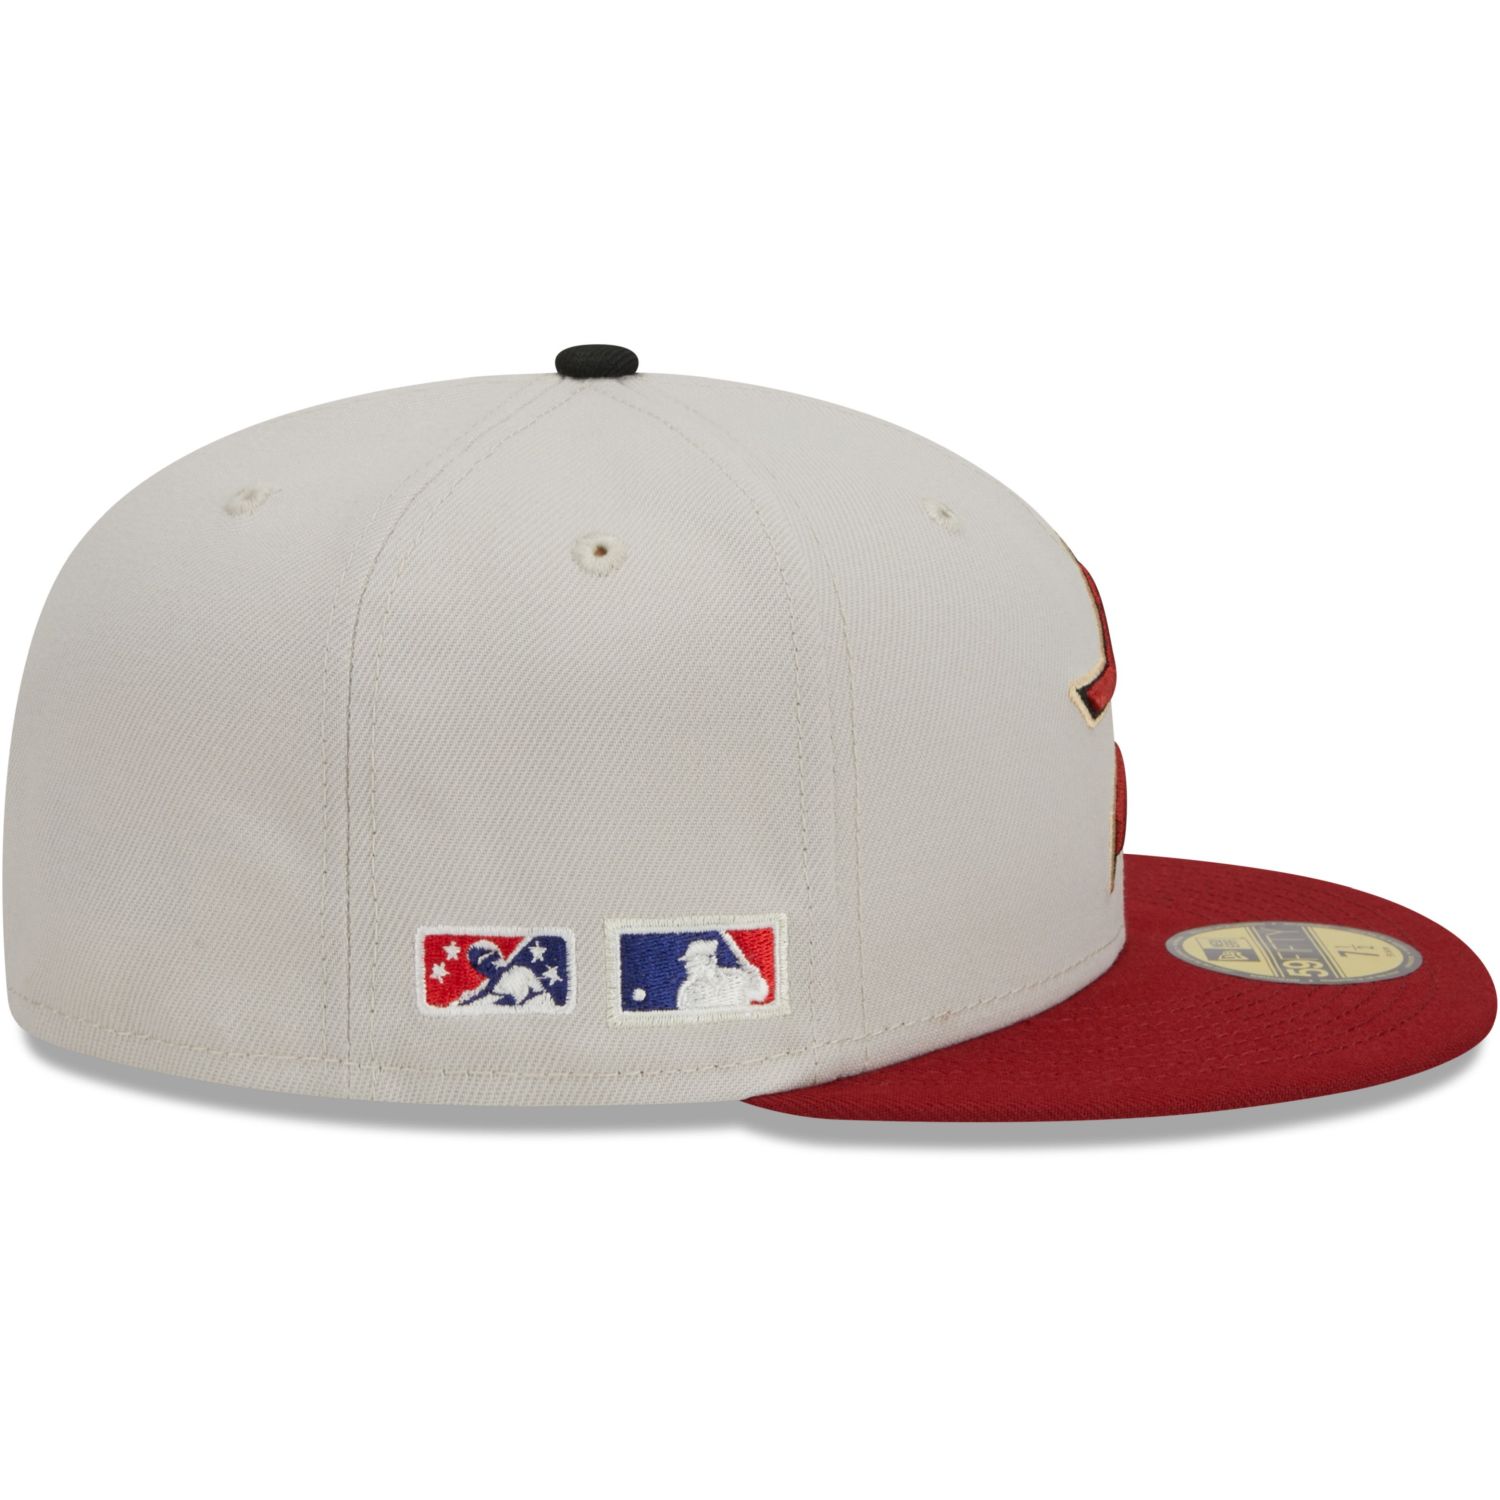 MLB Houston Astros White Front Basic 59Fifty Fitted Cap (White/Team, 634) :  Sports Fan Baseball Caps : Sports & Outdoors 